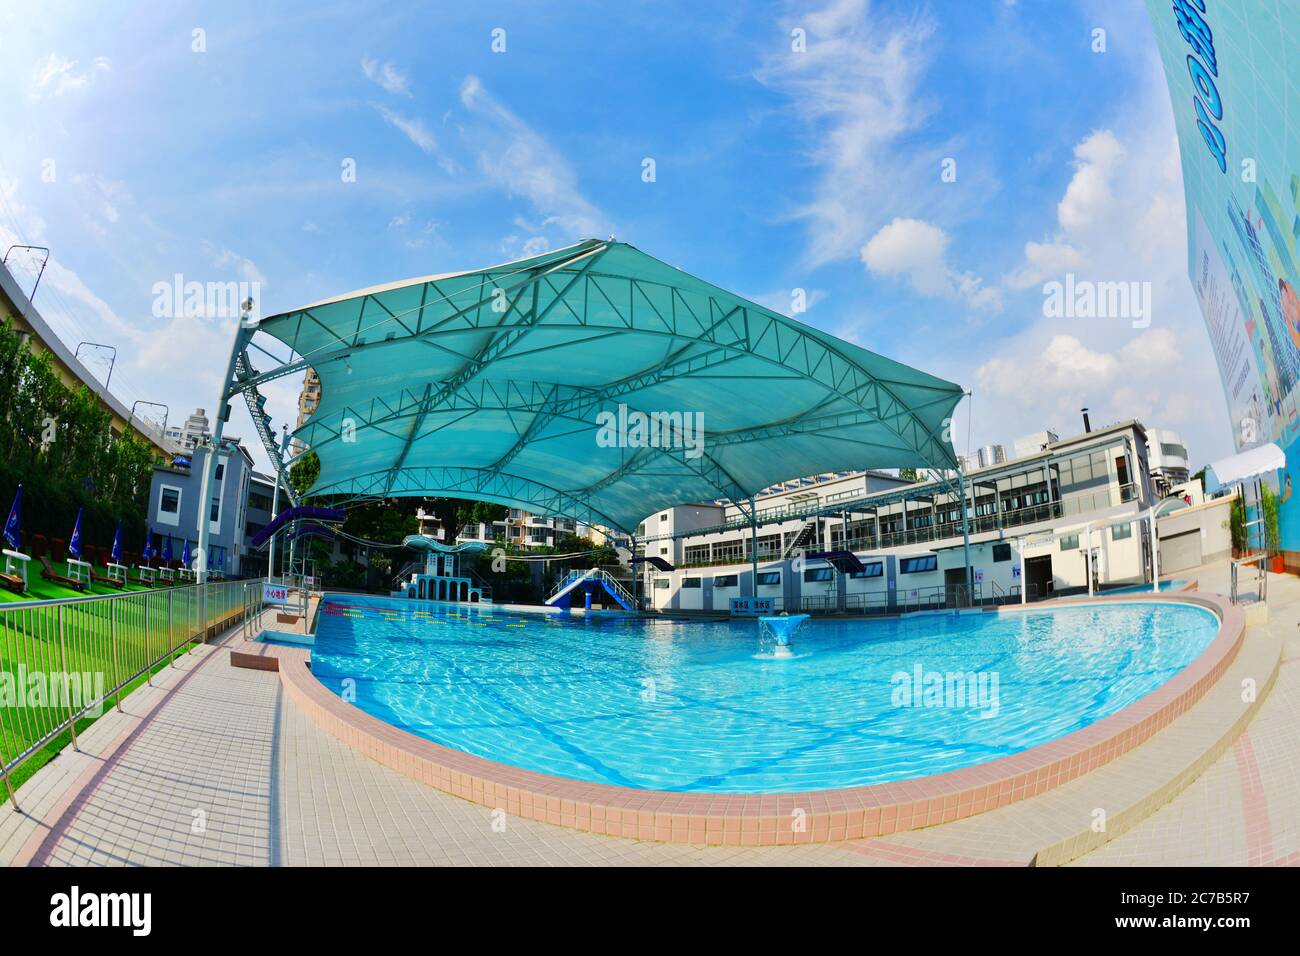 July 16, 2020, Shanghai, Shanghai, China: ShanghaiÃ¯Â¼Å'CHINA-Hongkou Swimming Pool, the oldest swimming pool in Shanghai, reopened on July 13 after a series of renovations. Hongkou swimming pool was founded in 1922, the eastern jiangwan road 500, east of one hundred, lu xun park, south reliance modern hongkou football stadium, has a history of 98 years, is the earliest open in Shanghai public swimming pool, after nearly hundred years vicissitudes of life change, as the public fitness, leisure, entertainment, summer activities, known to all, in order to make the famous old stadium continue to Stock Photo